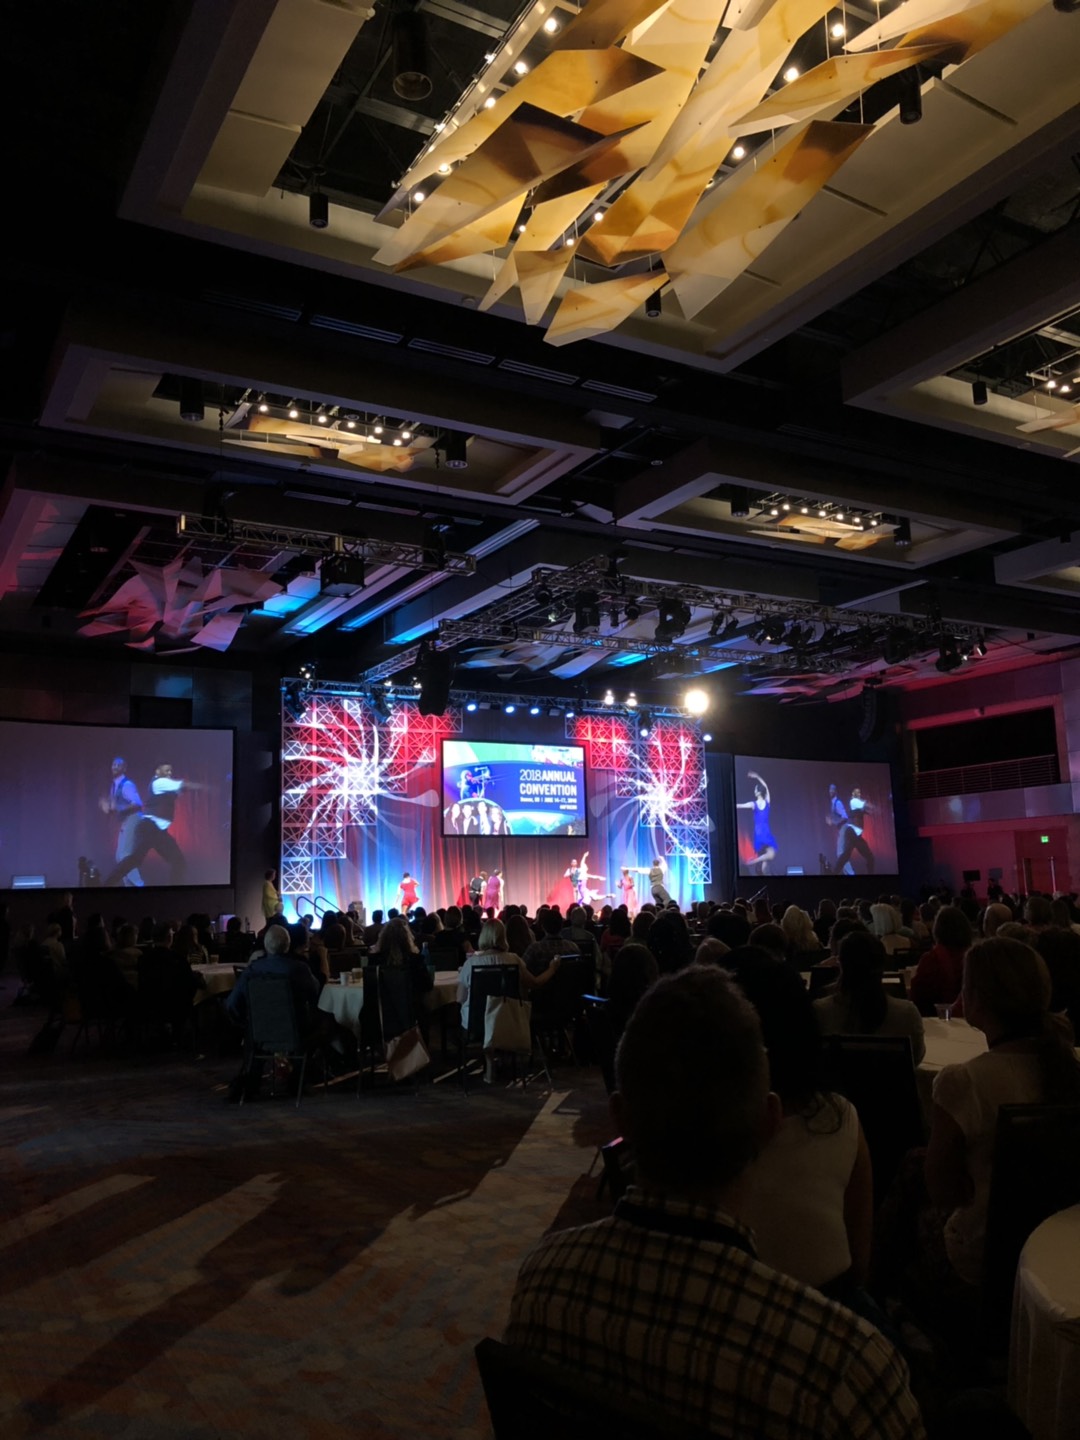  Exciting festivities happening at AFTACON. Photo by Megan Keogh, SmartSimple Business Analyst 